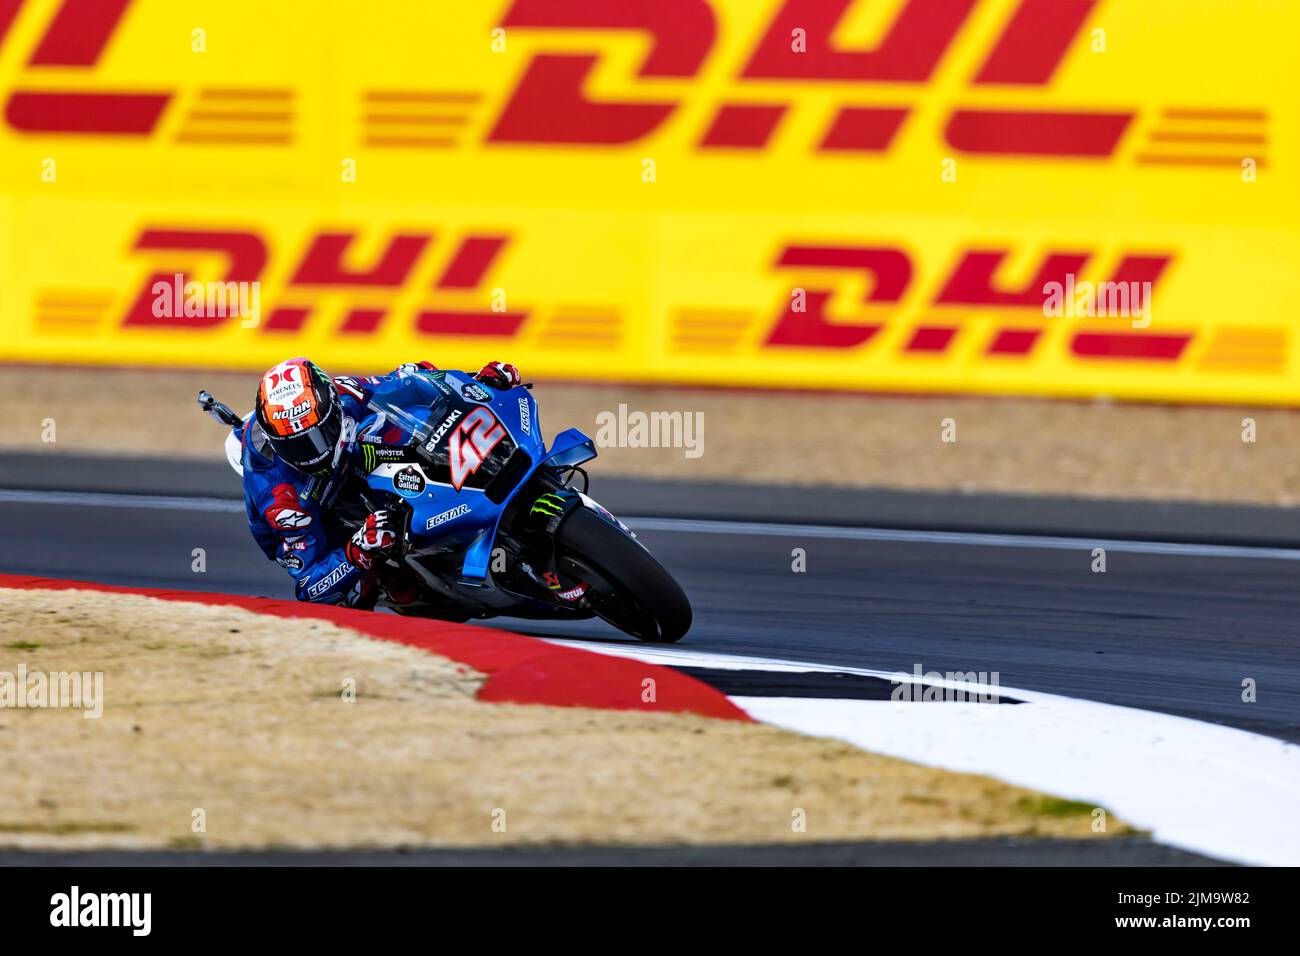 Silverstone, UK. 5th August 2022; Silverstone Circuit, Silverstone, Northamptonshire, England: British MotoGP Grand Prix, Free Practice: Number 42 Team Suzuki Ecstar bike ridden by Alex Rins during free practice at the British MotoGP Credit: Action Plus Sports Images/Alamy Live News Stock Photo